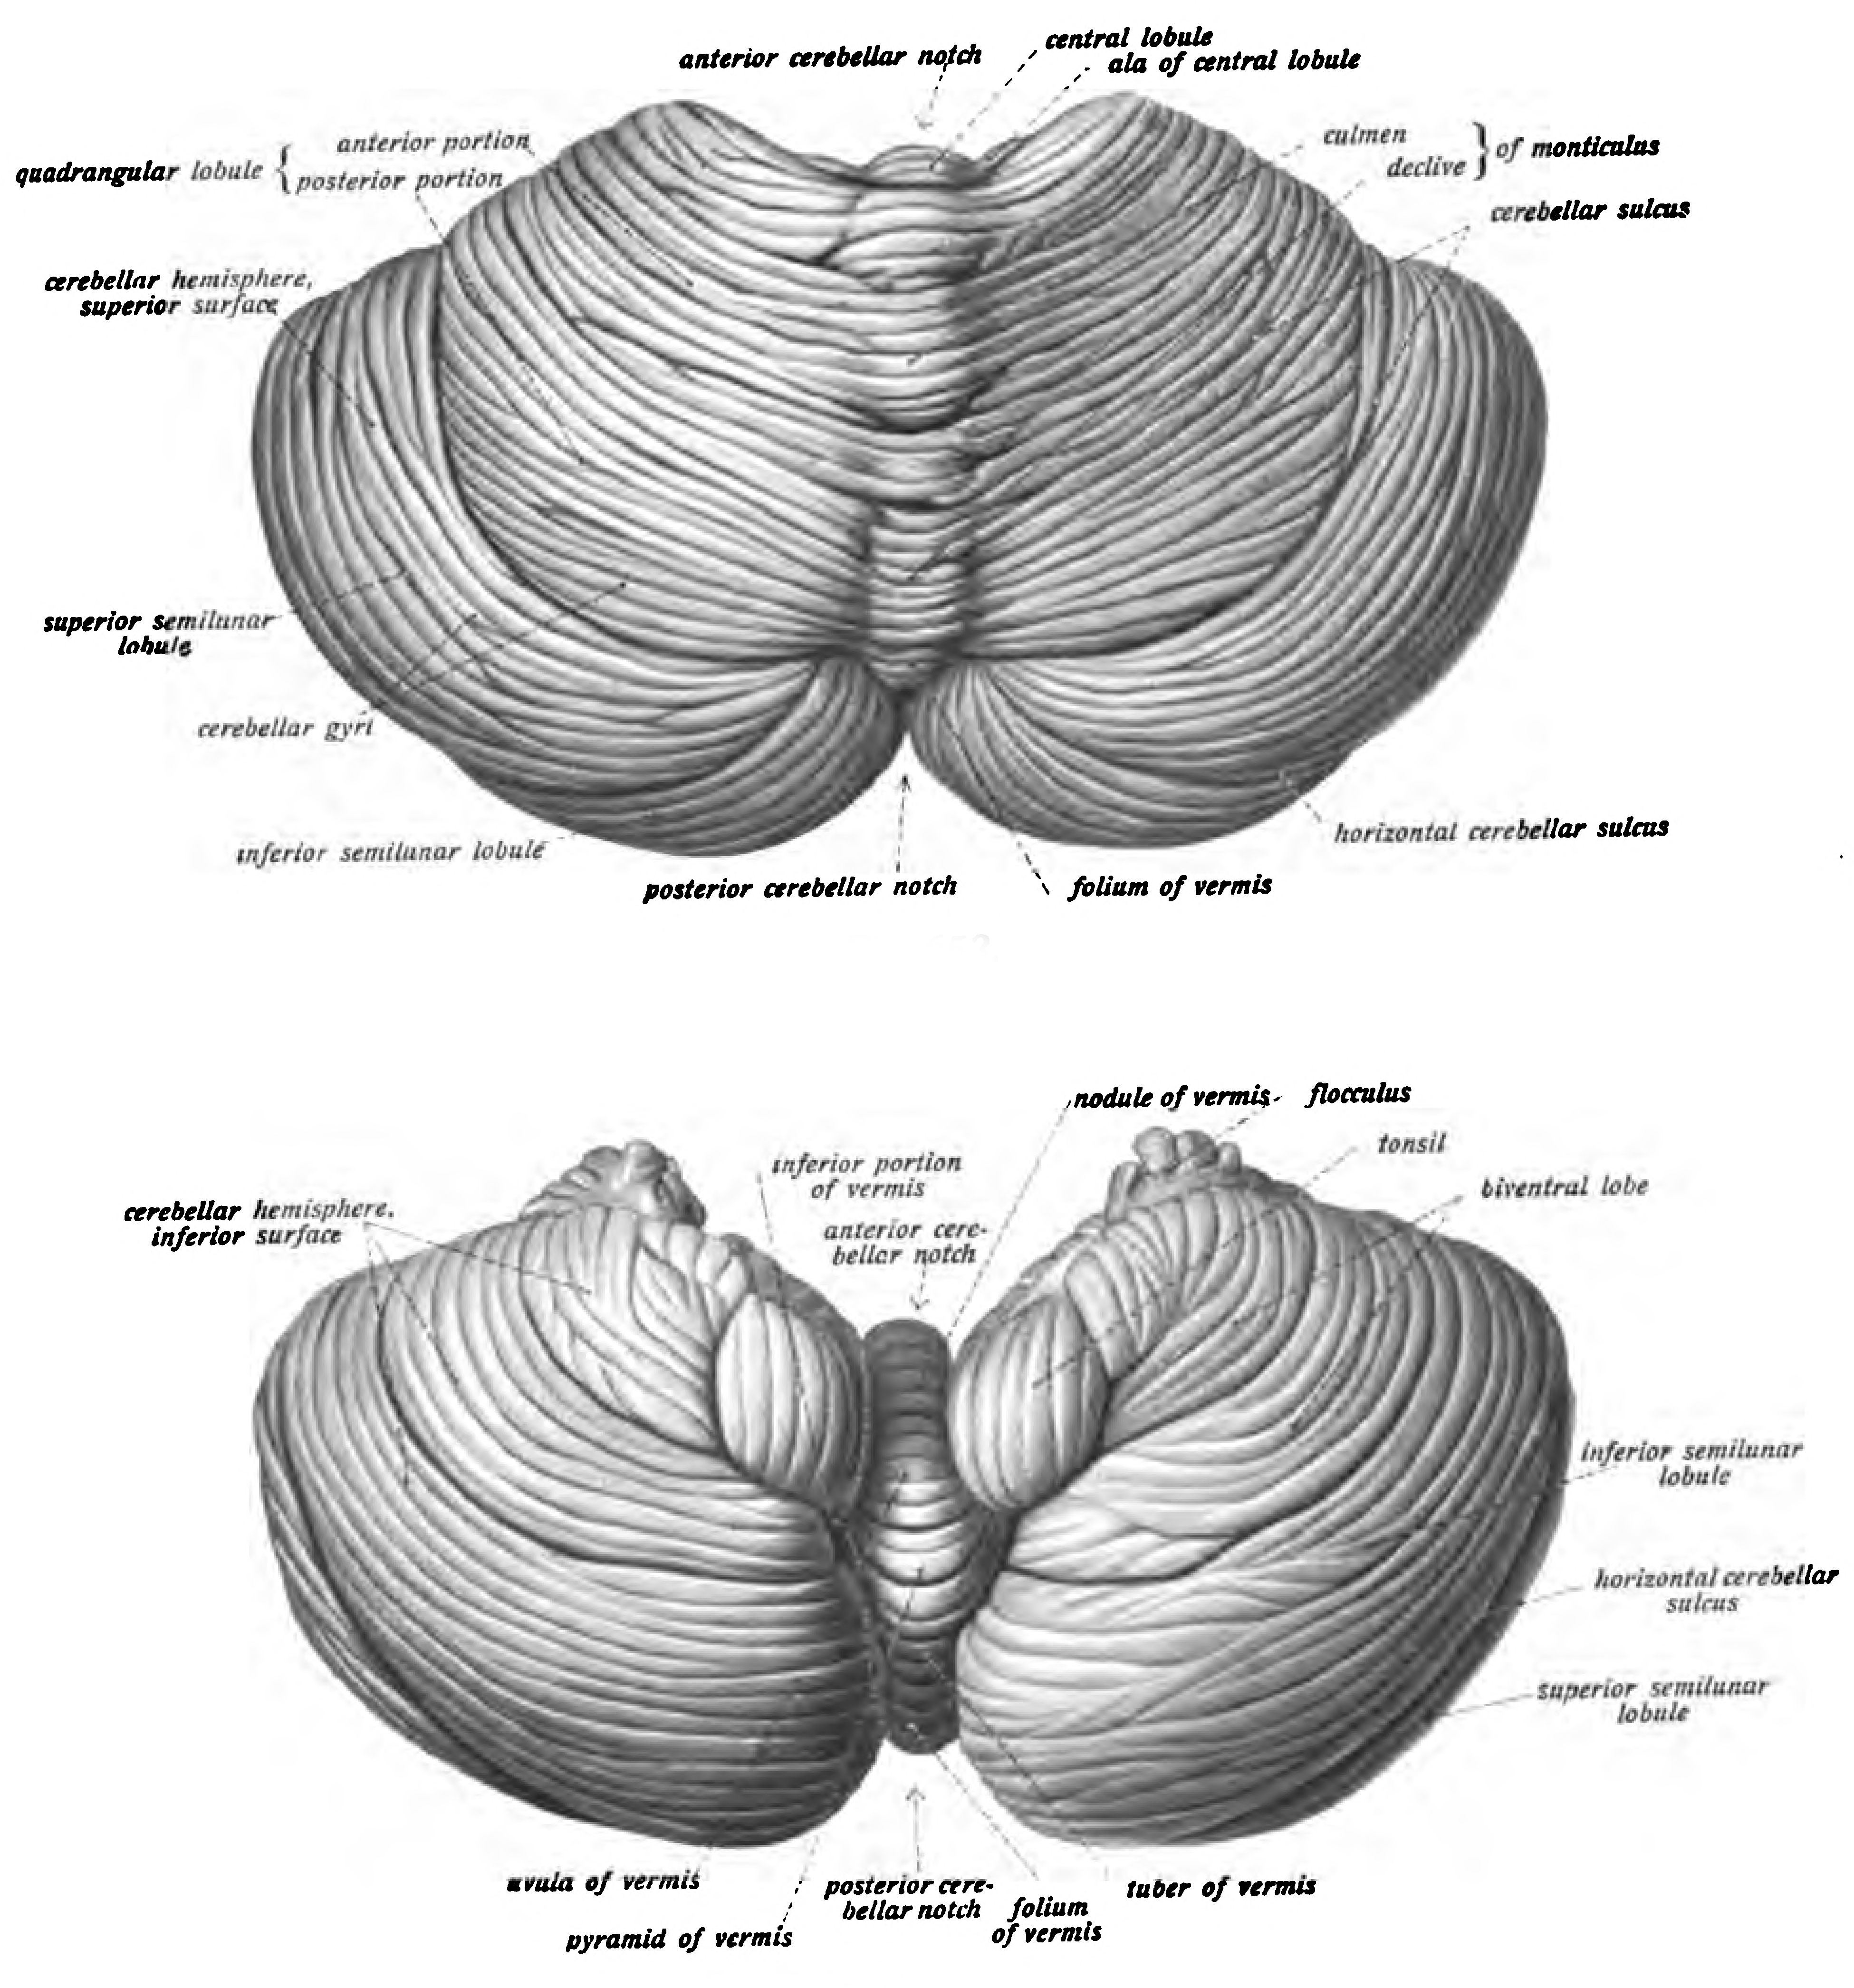 View of the cerebellum viewed from above and behind (top) and from below (bottom). Sobotta’s Textbook and Atlas of Human Anatomy 1909